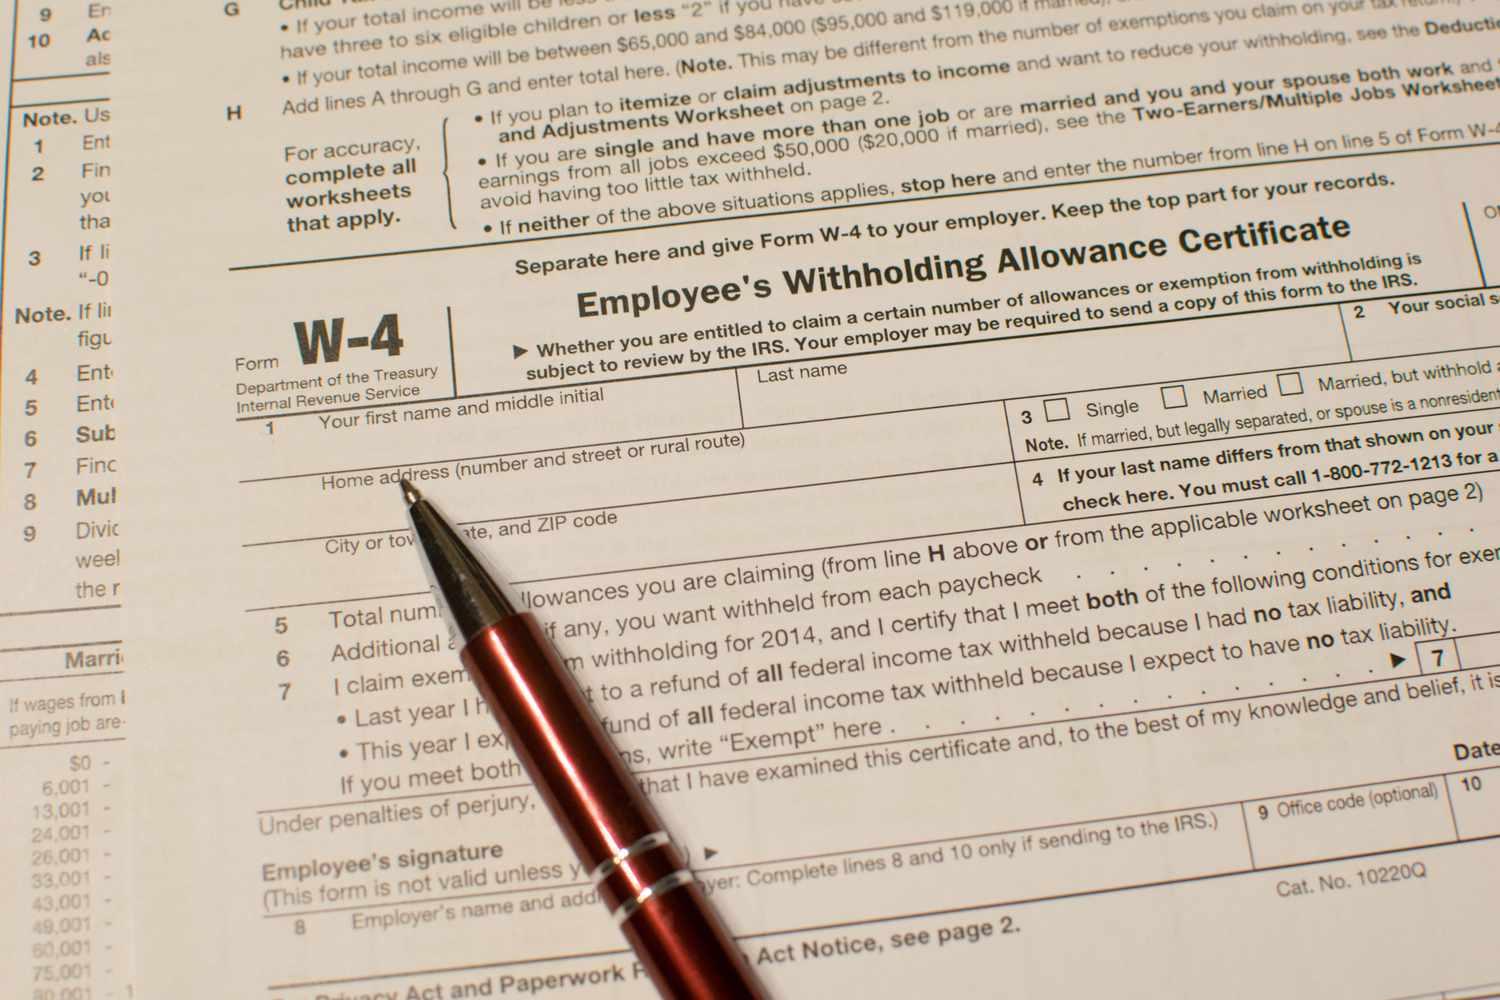 How To Fill Out Aw 4 Form: Important considerations for calculating dependents and allowances on the W-4 form.